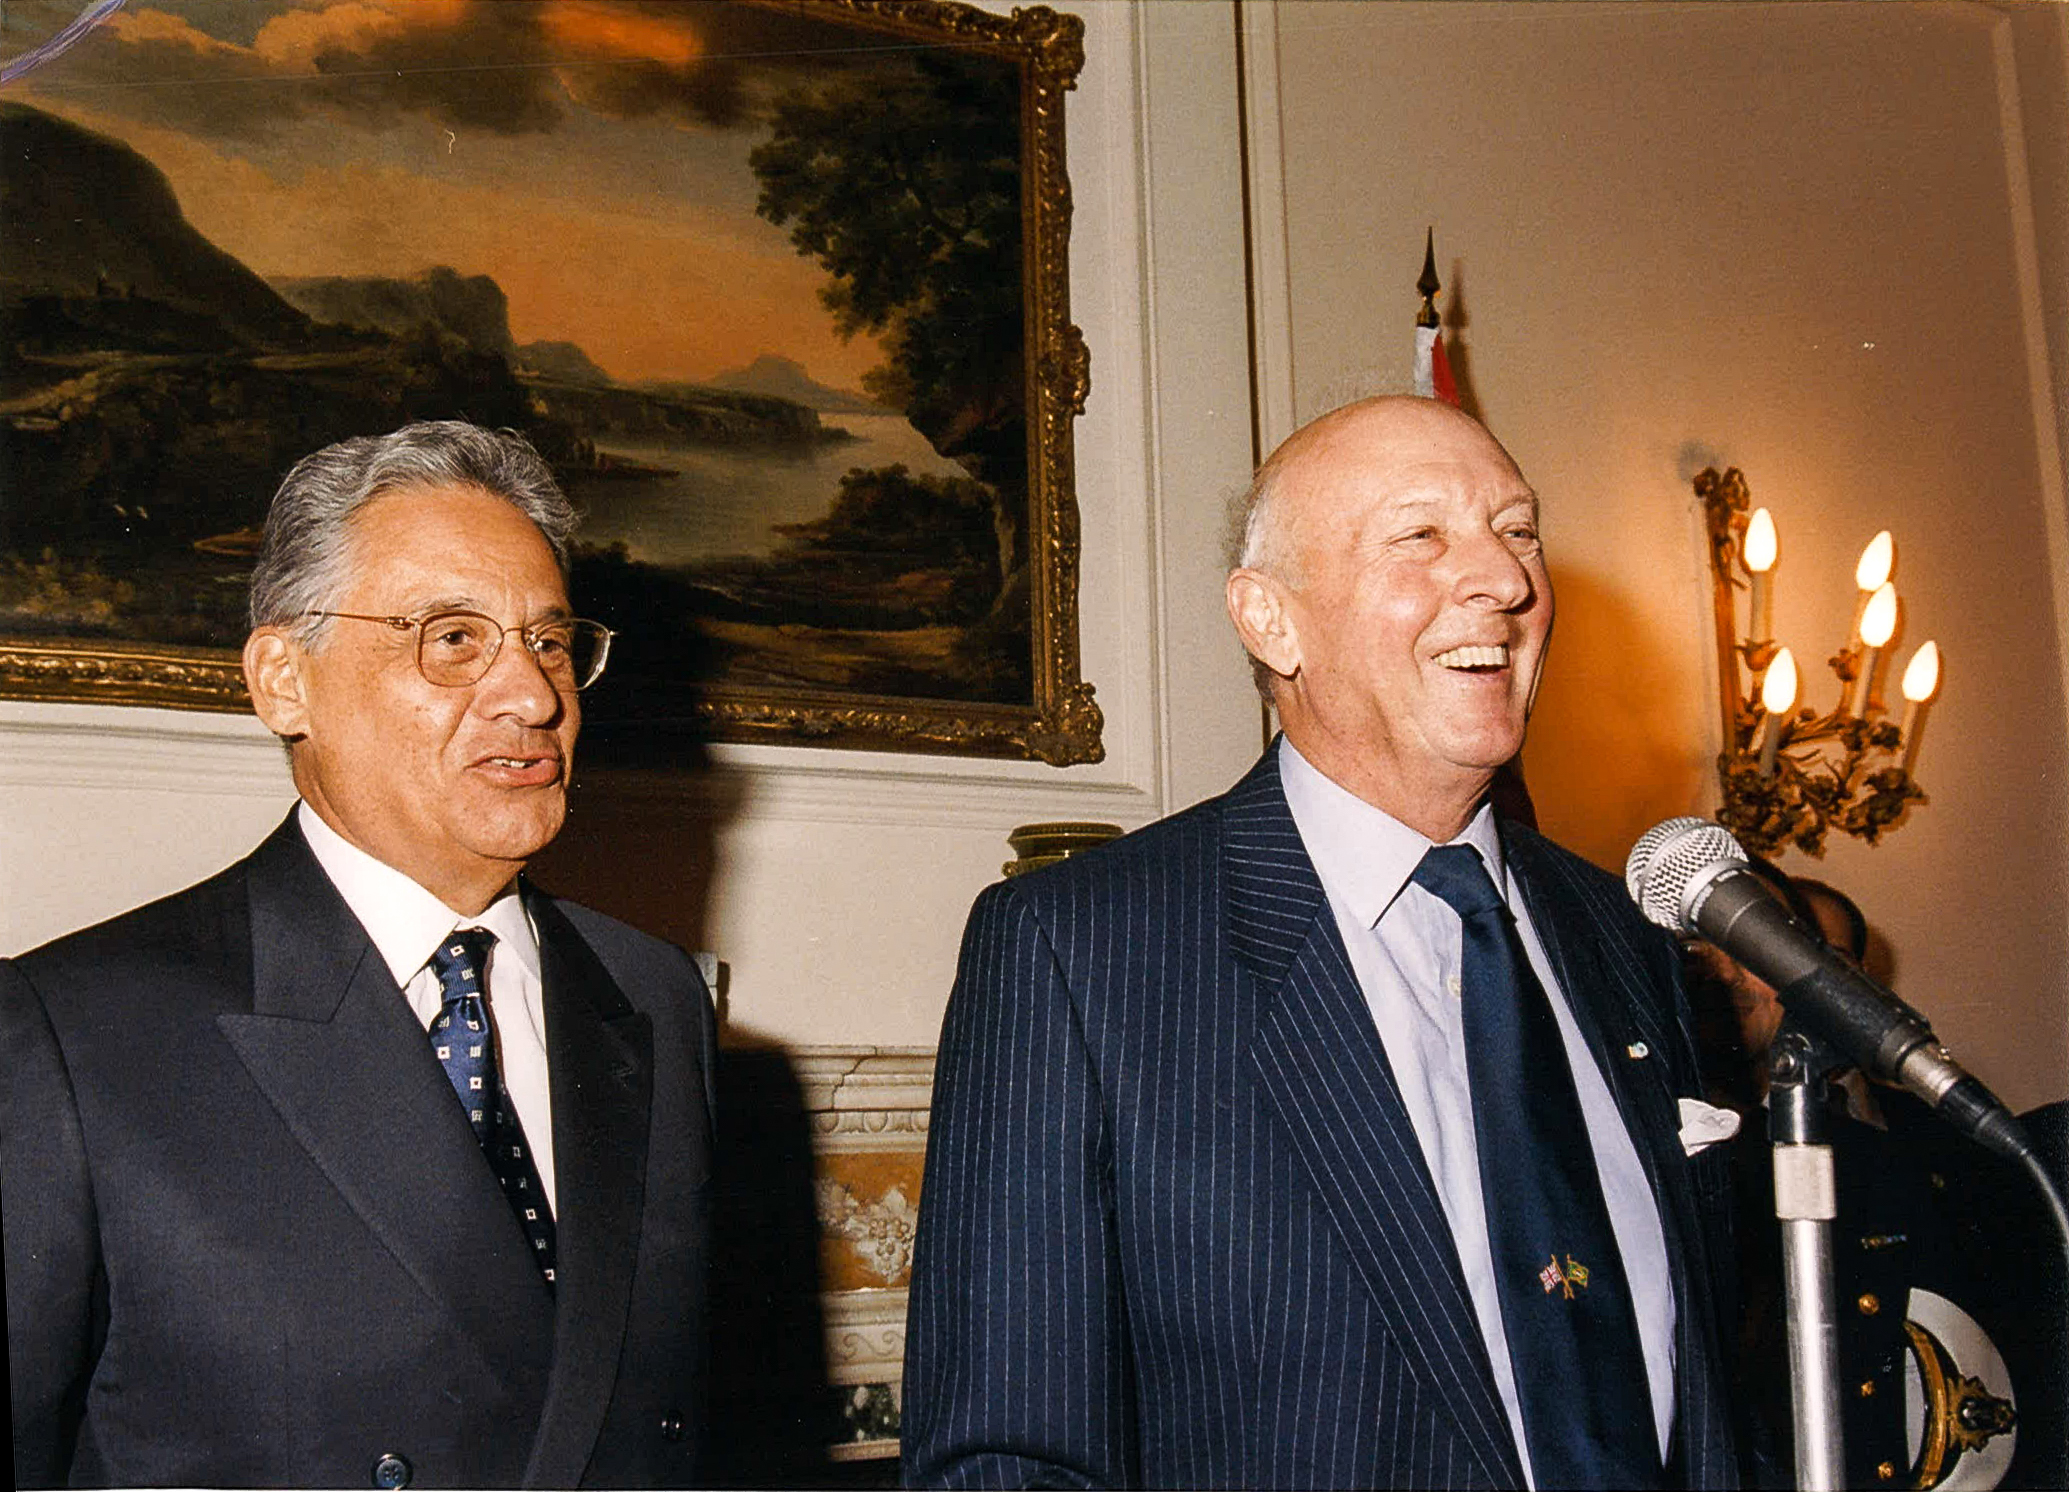 Viscount Montgomery introducing President Henrique Cardoso of Brazil for his Canning Lecture in 1997